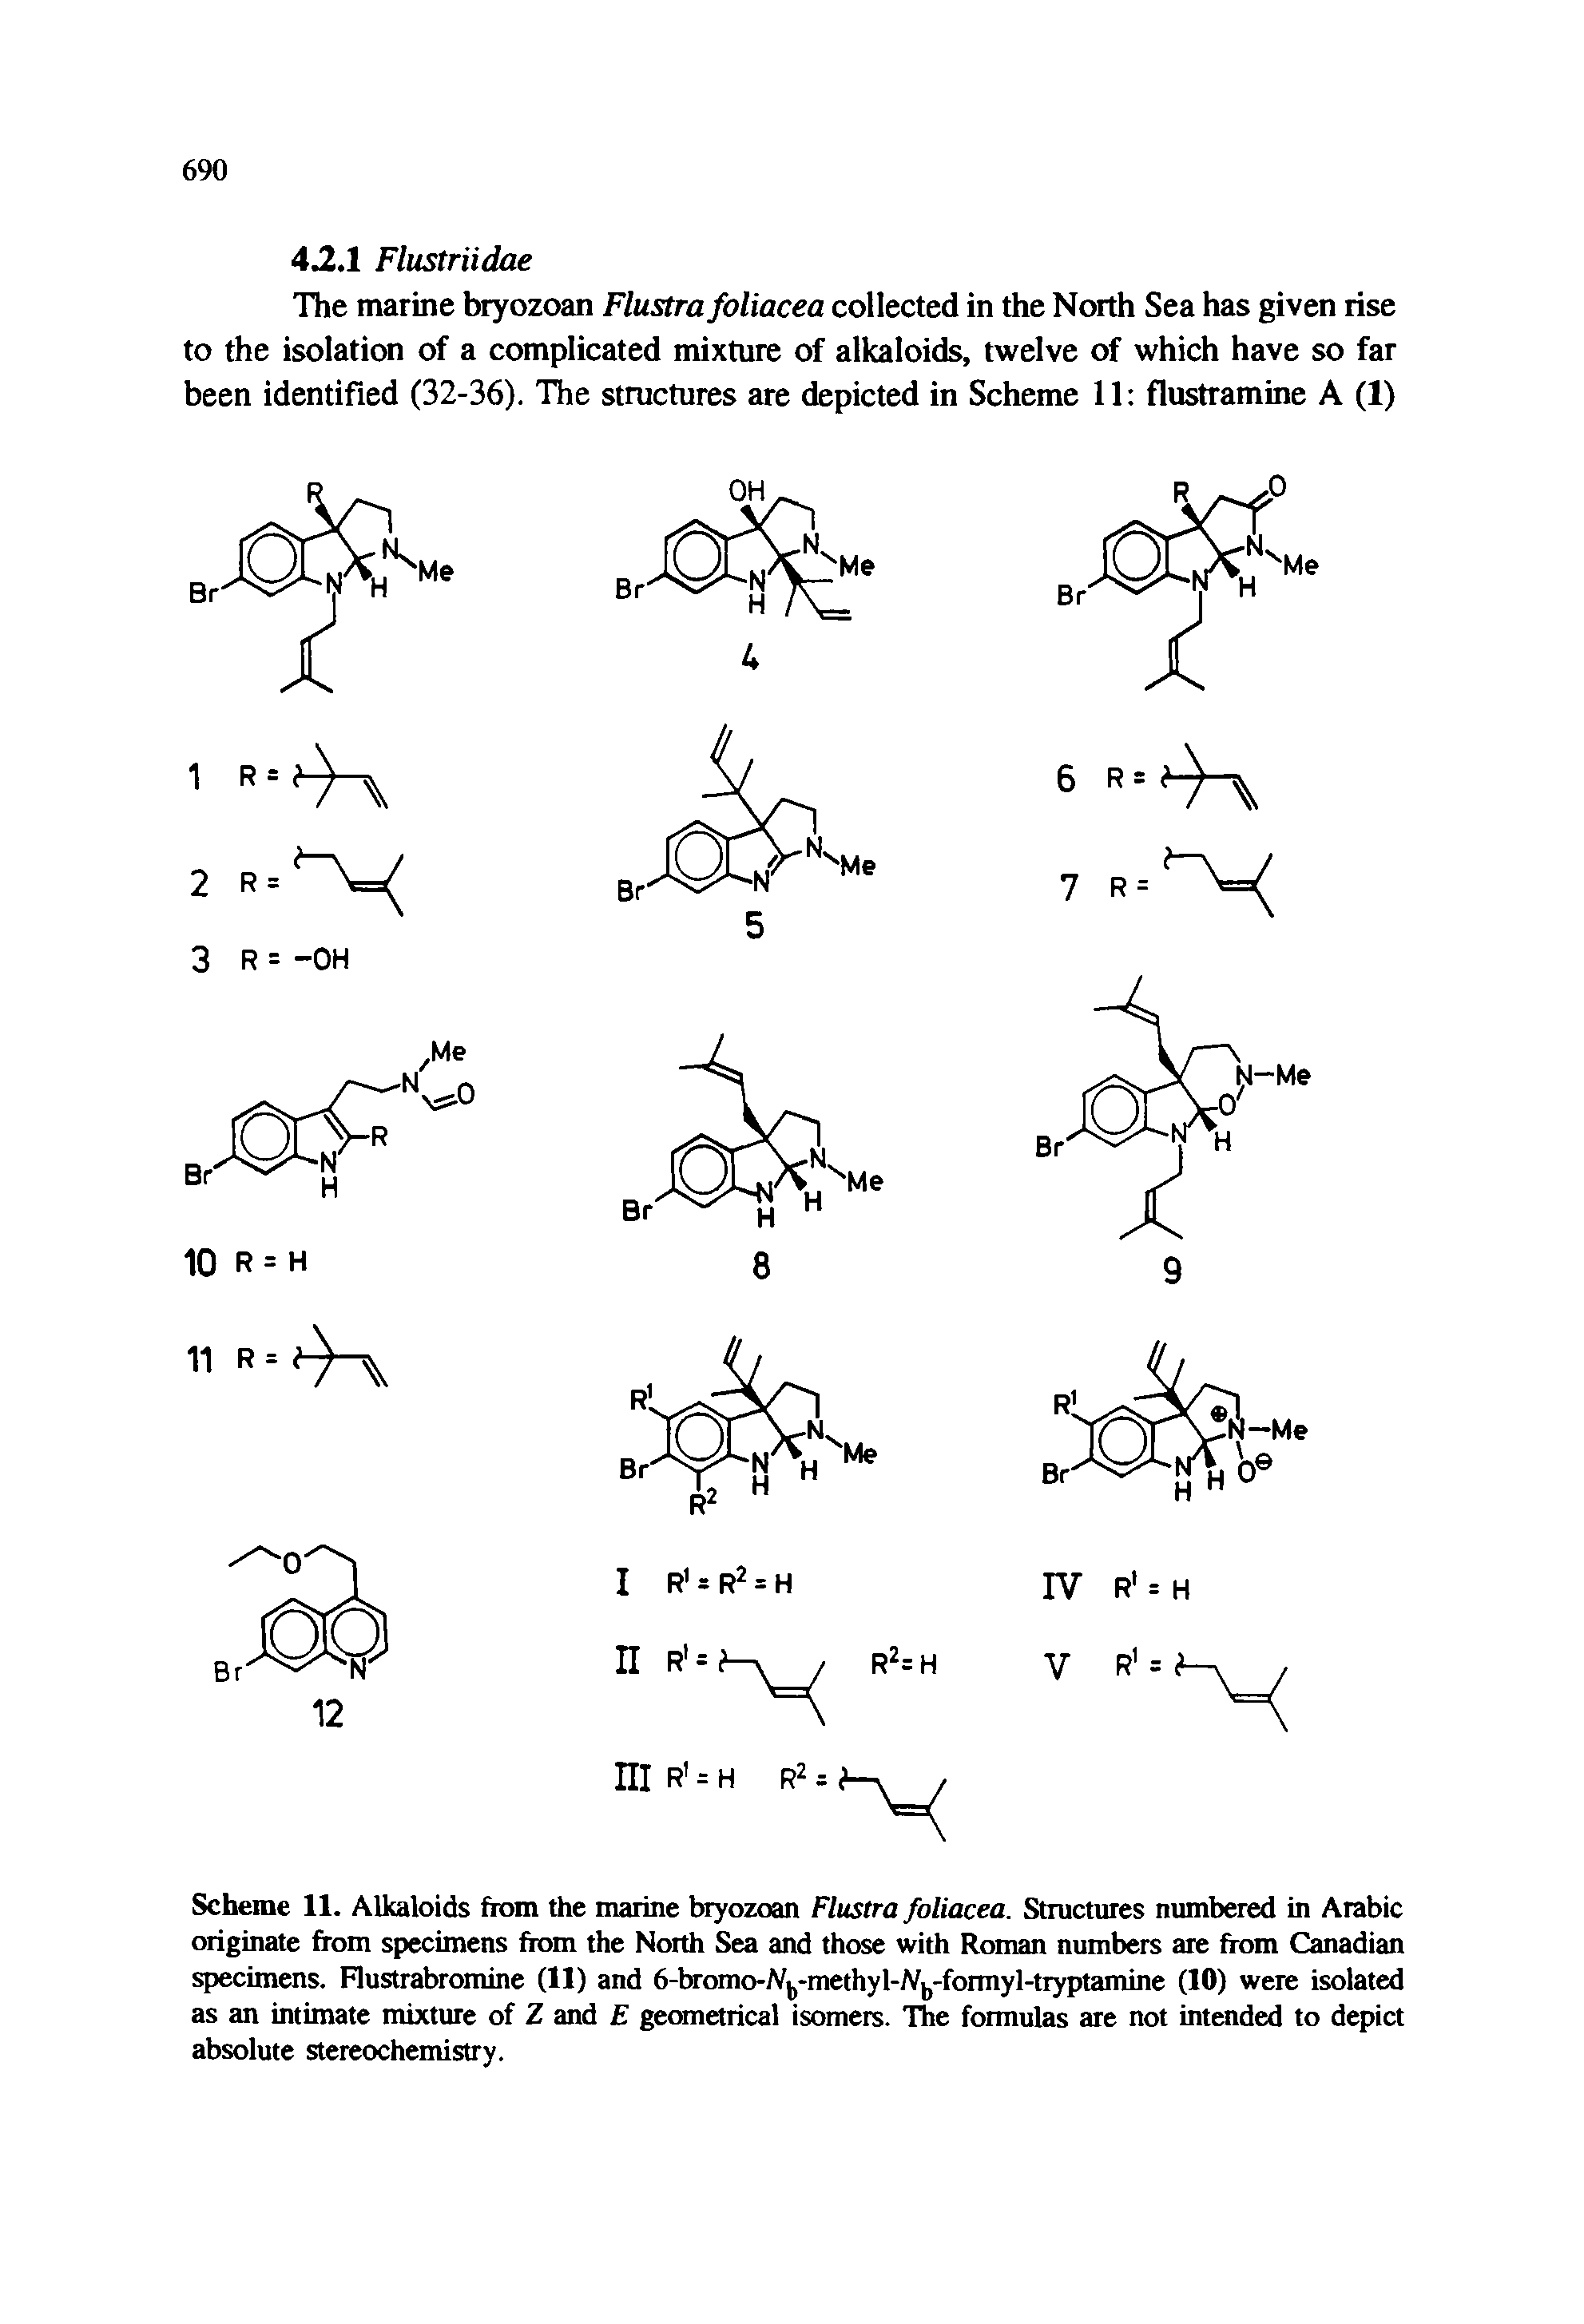 Scheme 11. Alkaloids from the marine bryozoan Flustra foliacea. Structures numbered in Arabic originate from specimens from the North Sea and those with Roman numbers are from Canadian specimens. Flustrabromine (11) and 6-bromo-/Vb-methyl-/Vb-formyl-tryptamine (10) were isolated as an intimate mixture of Z and E geometrical isomers. The formulas are not intended to depict absolute stereochemistry.